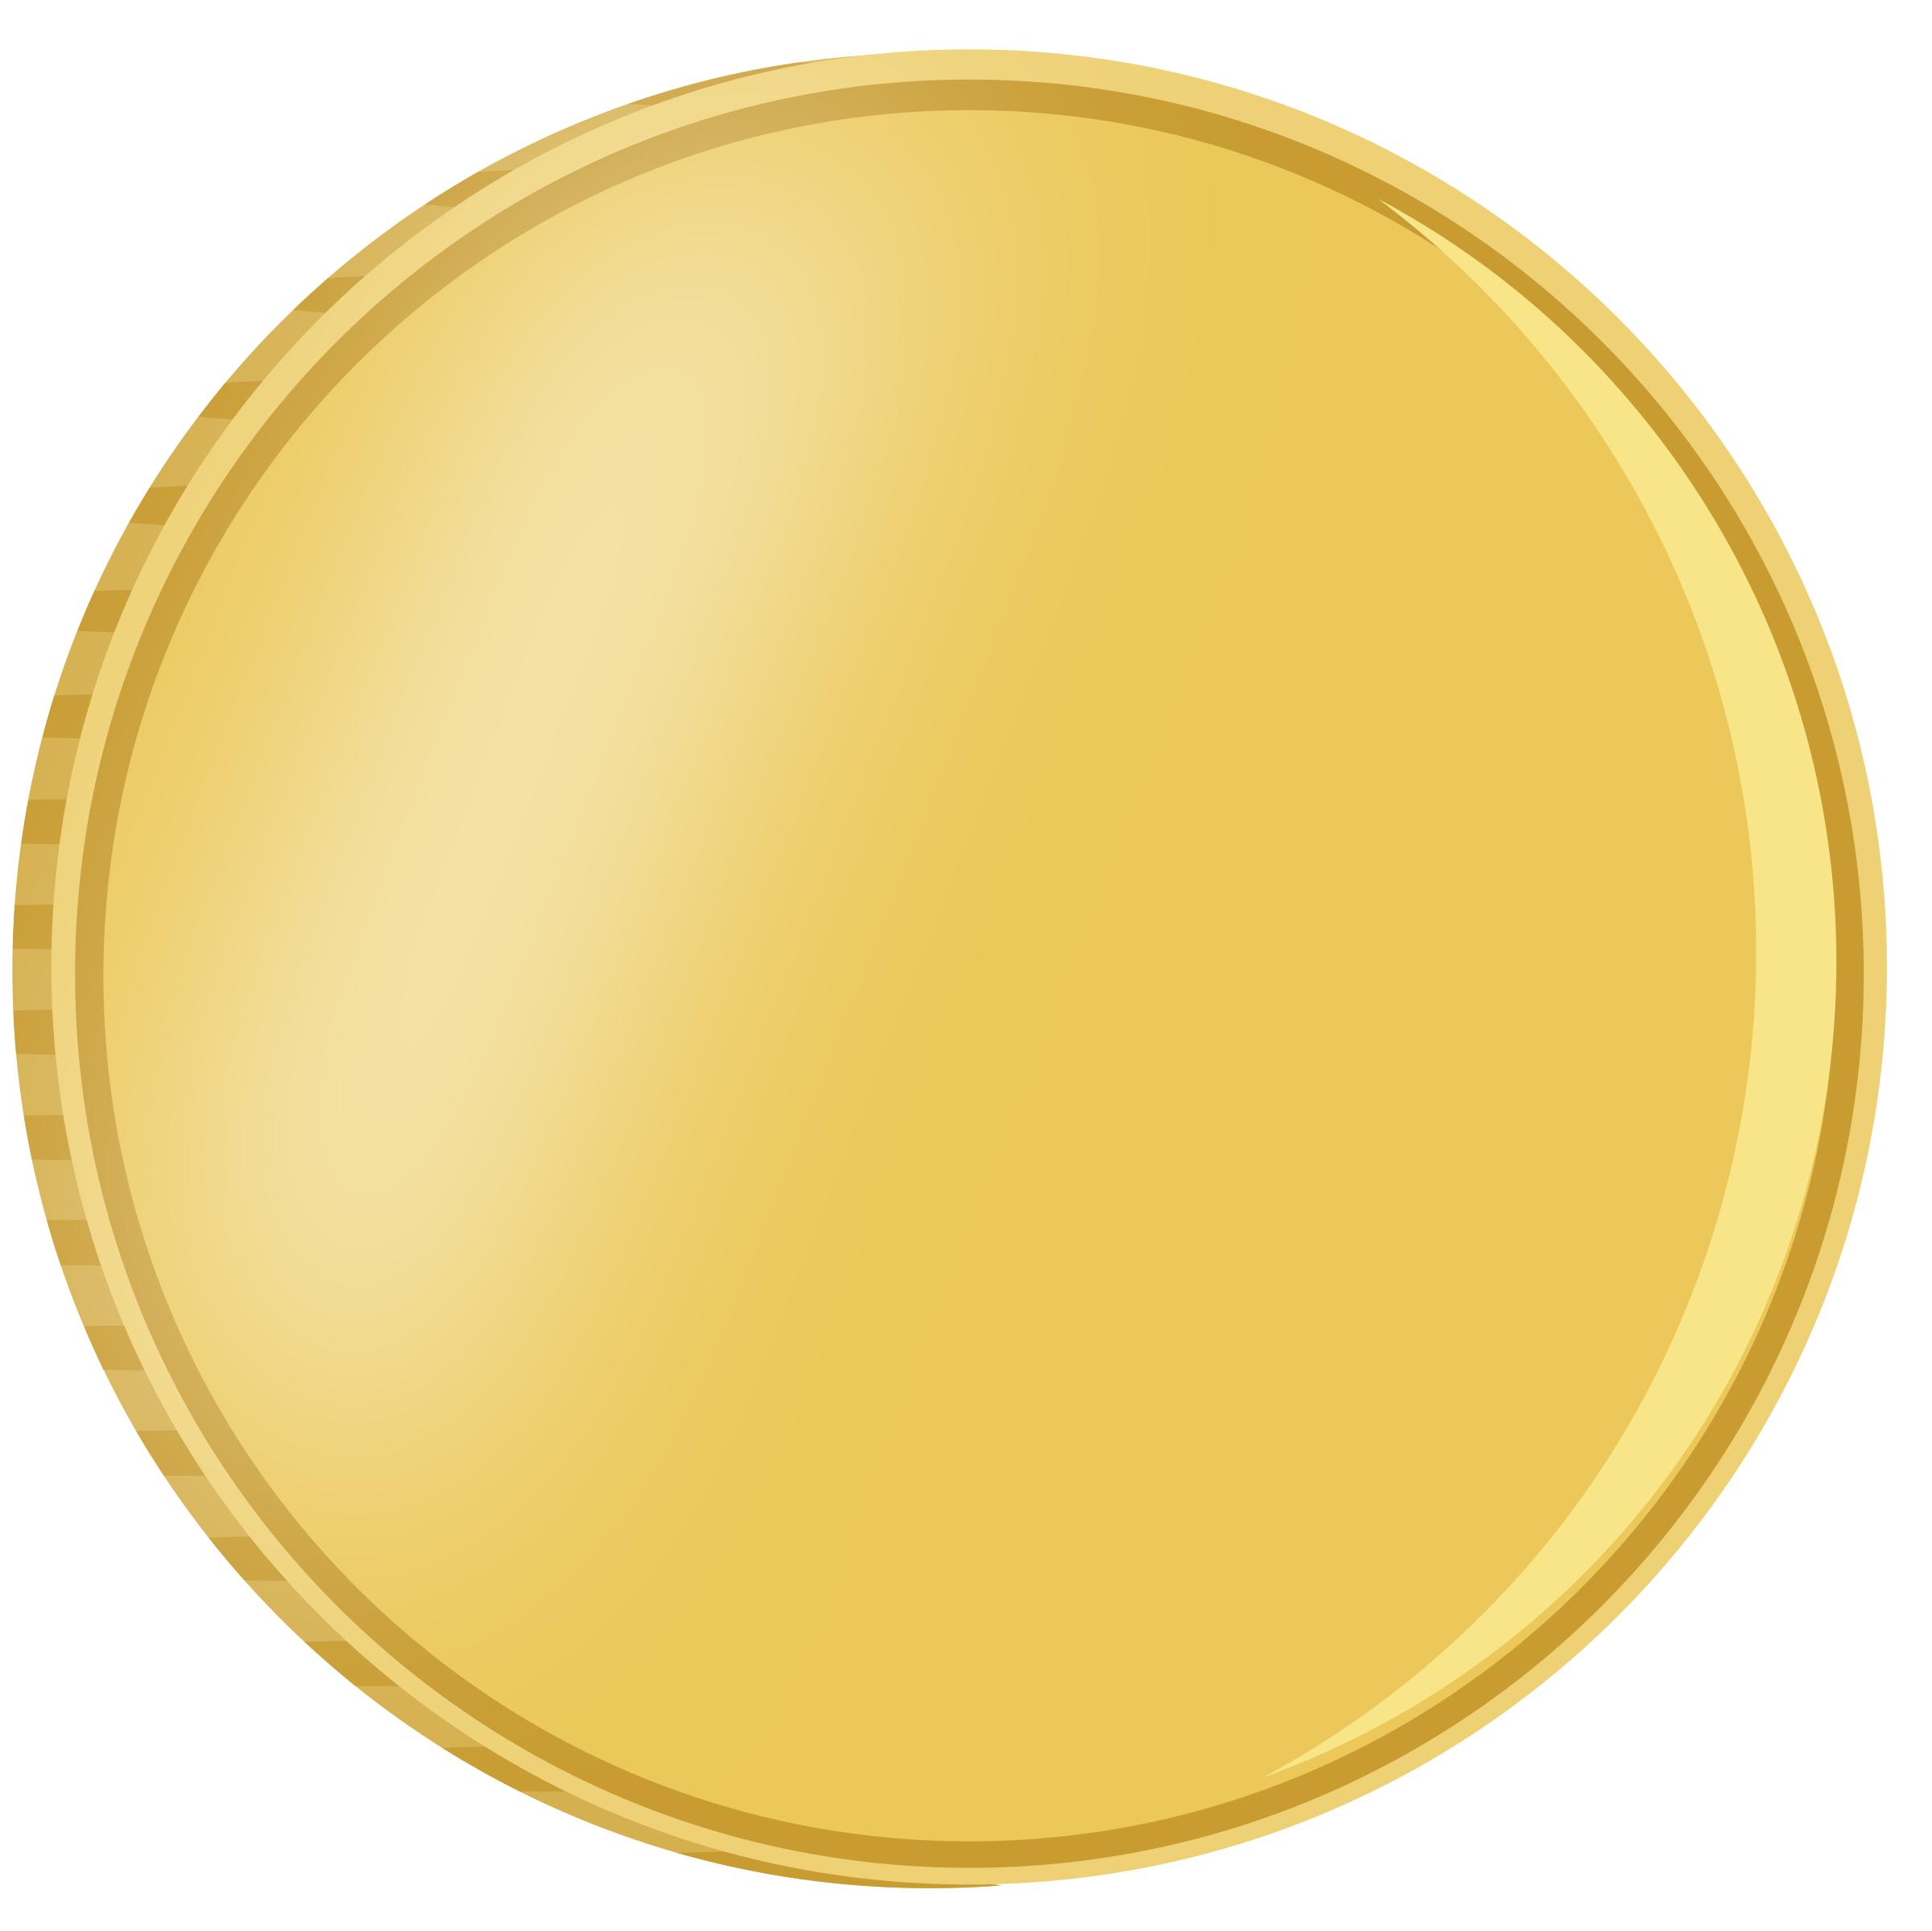 Spinning coin 1 png